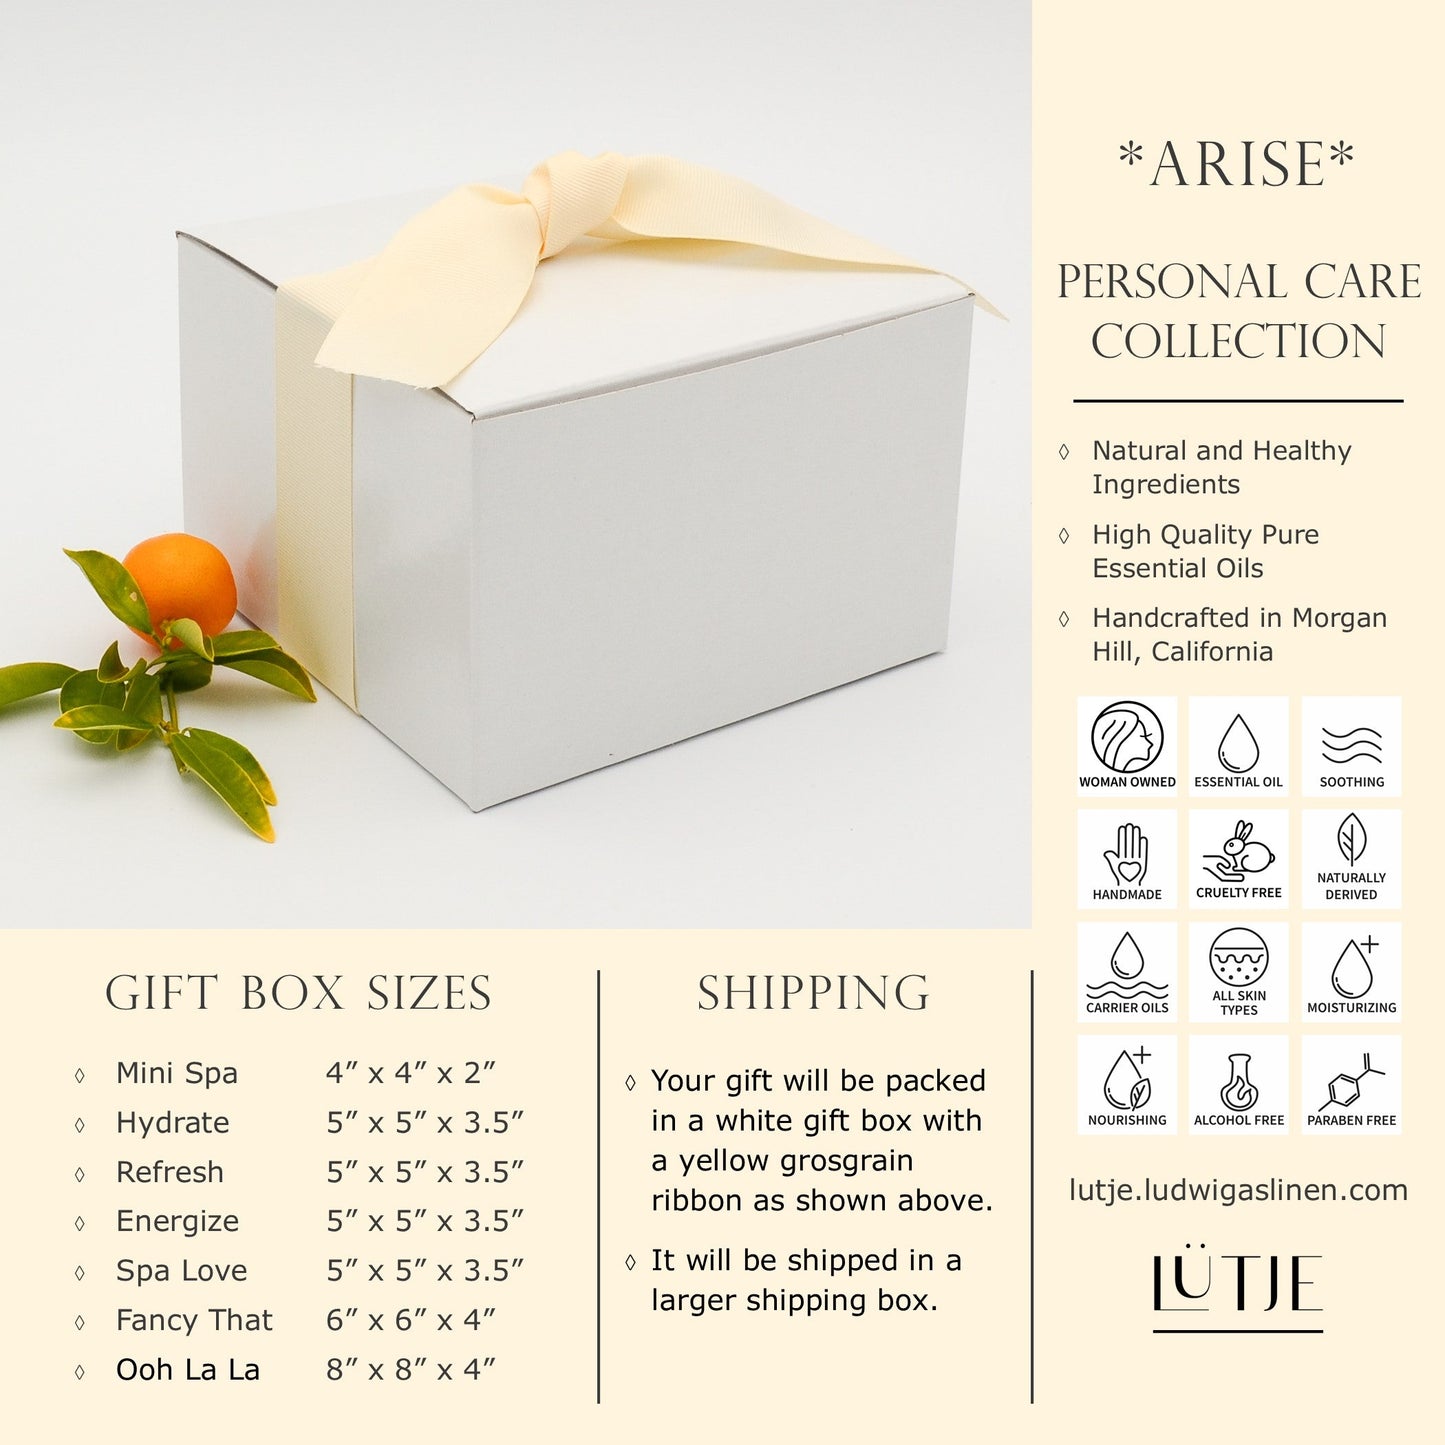 Gift Box for women Neroli & Jasmine Arise Collection shipping and general information including made with natural and healthy ingredients,woman owned, handmade, cruelty free, naturally derived, pure essential oils, all skin types, moisturizing, soothing, nourishing, alcohol free and paraben free. 